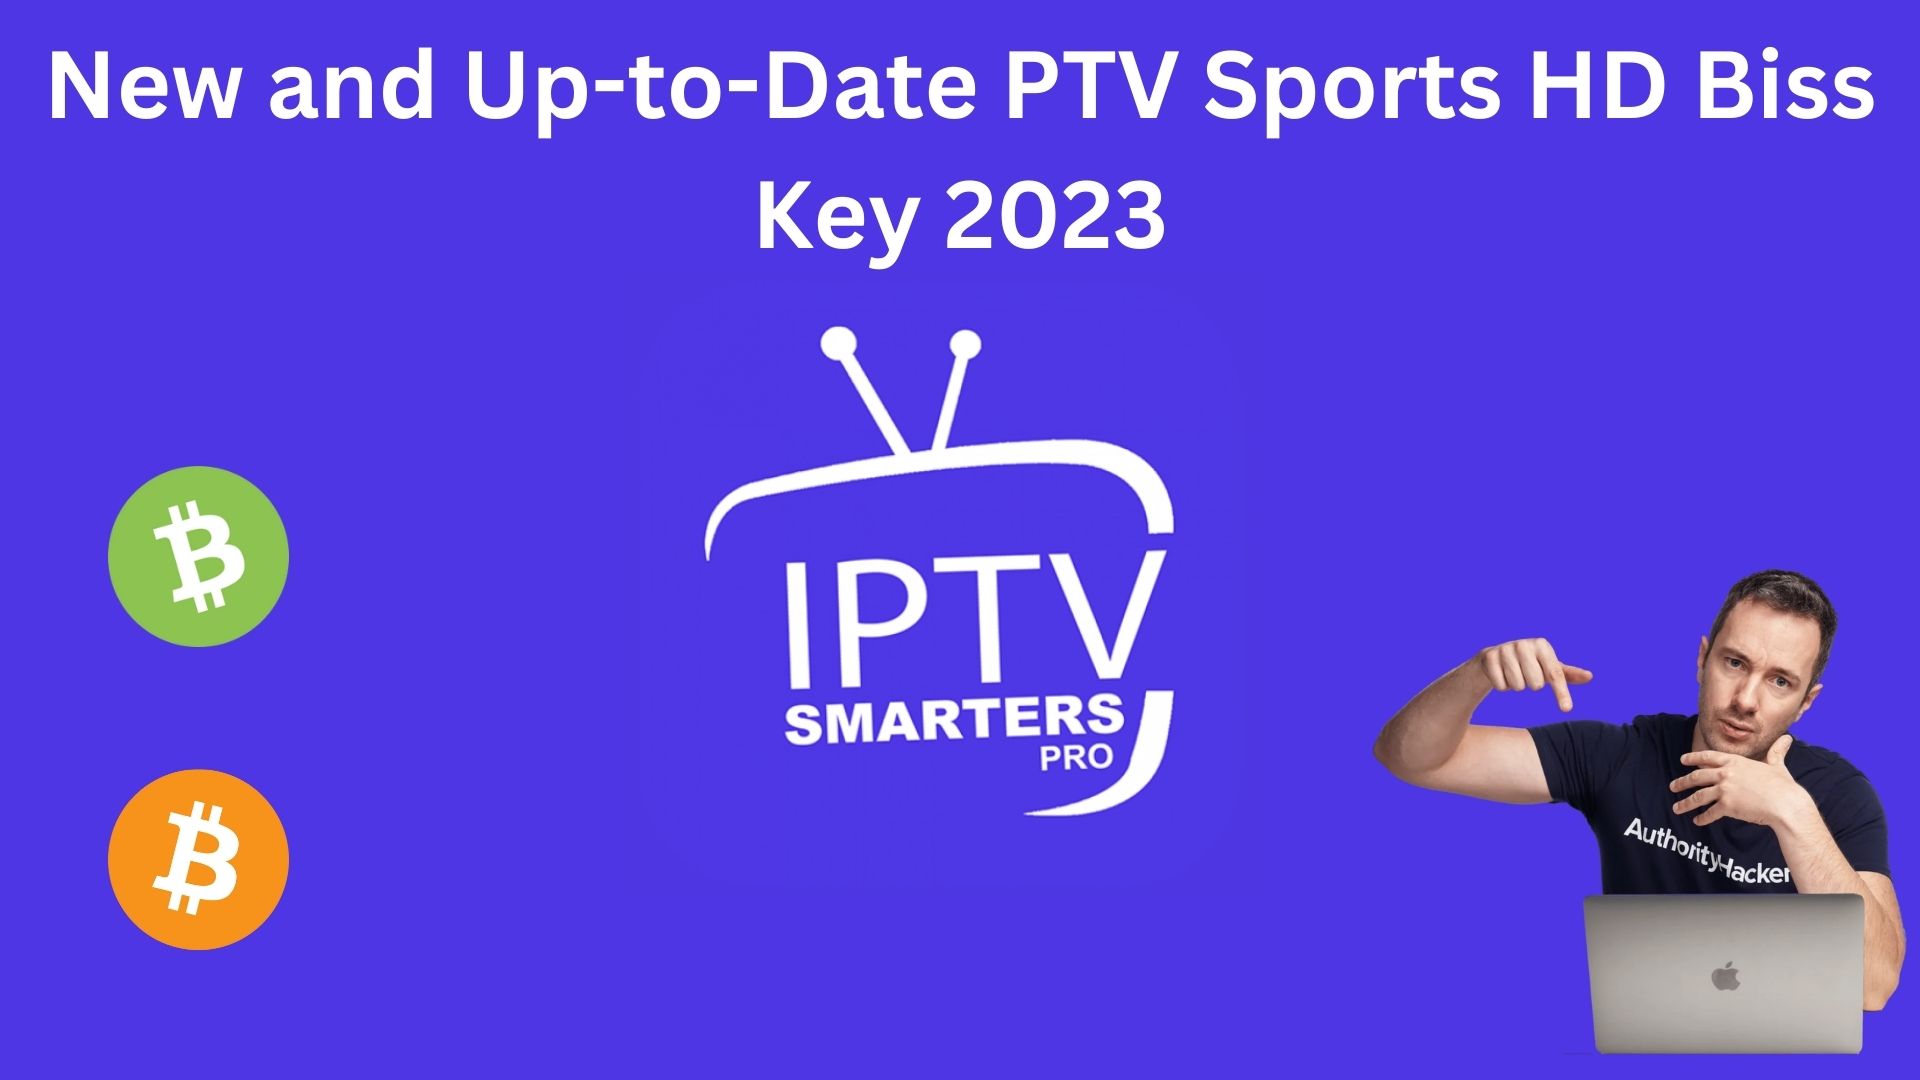 New and up-to-date ptv sports hd biss key 2023